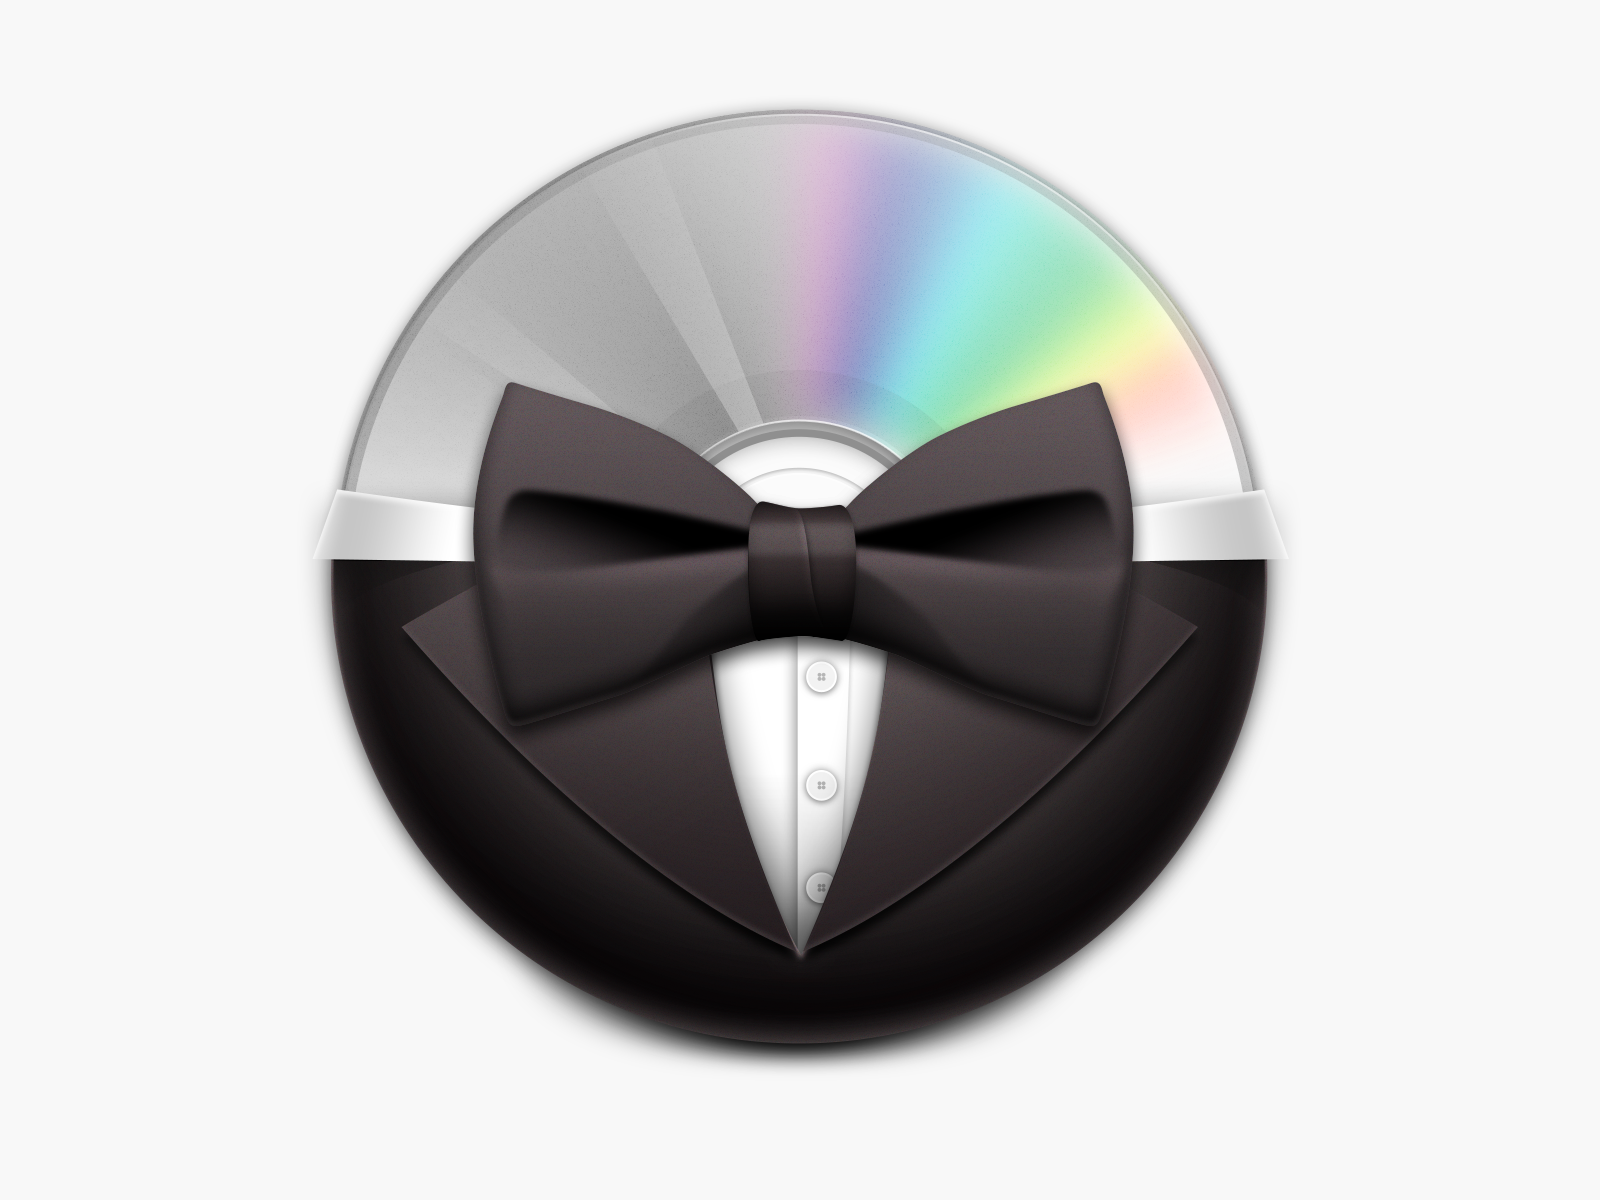 Gucci Bowtie App Icons by TrickD123 on DeviantArt